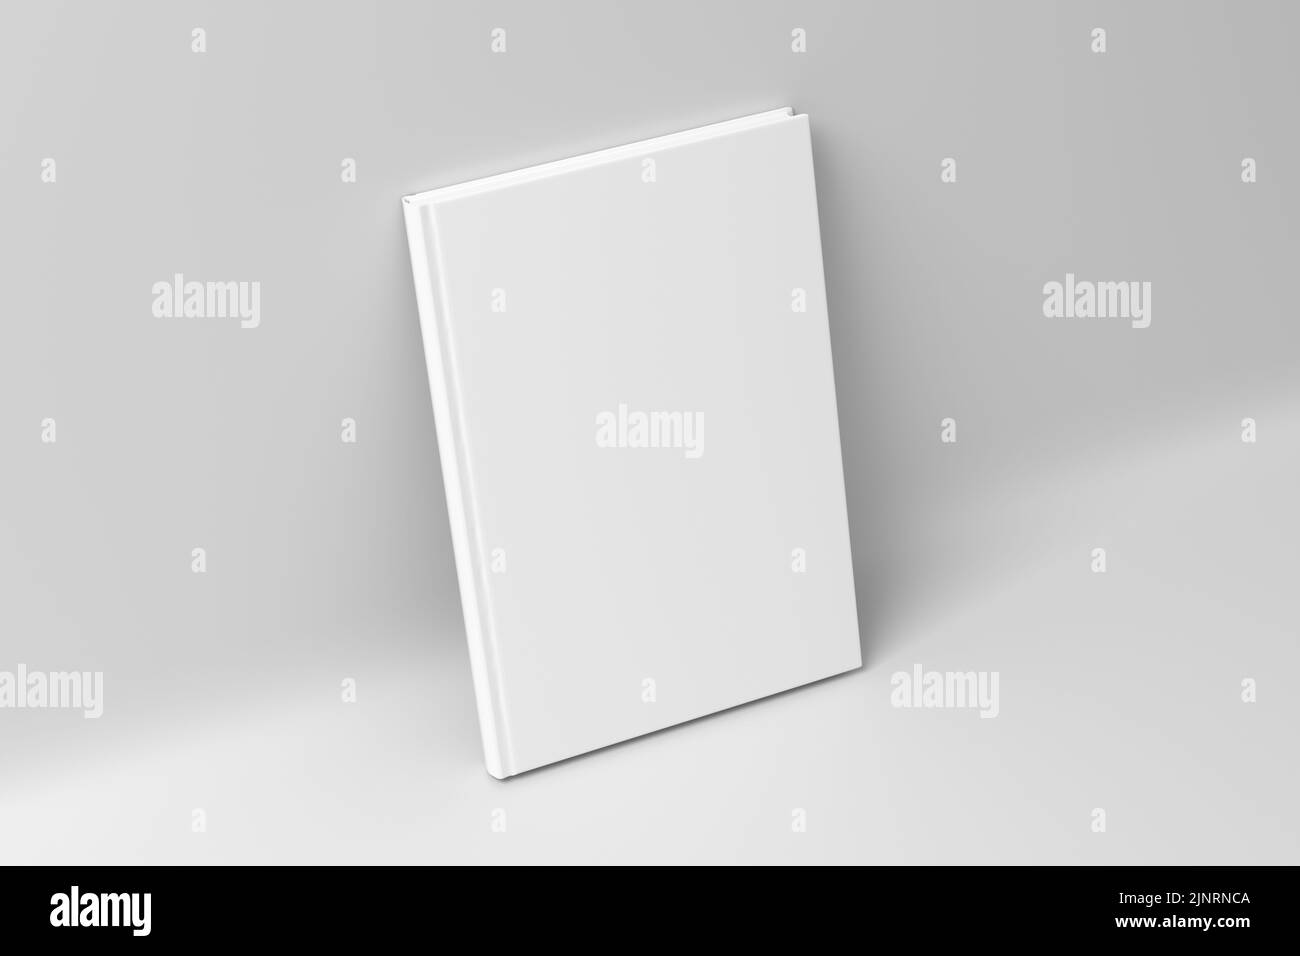 Blank vertical hardcover book cover mockup standing on white background. 3d render Stock Photo